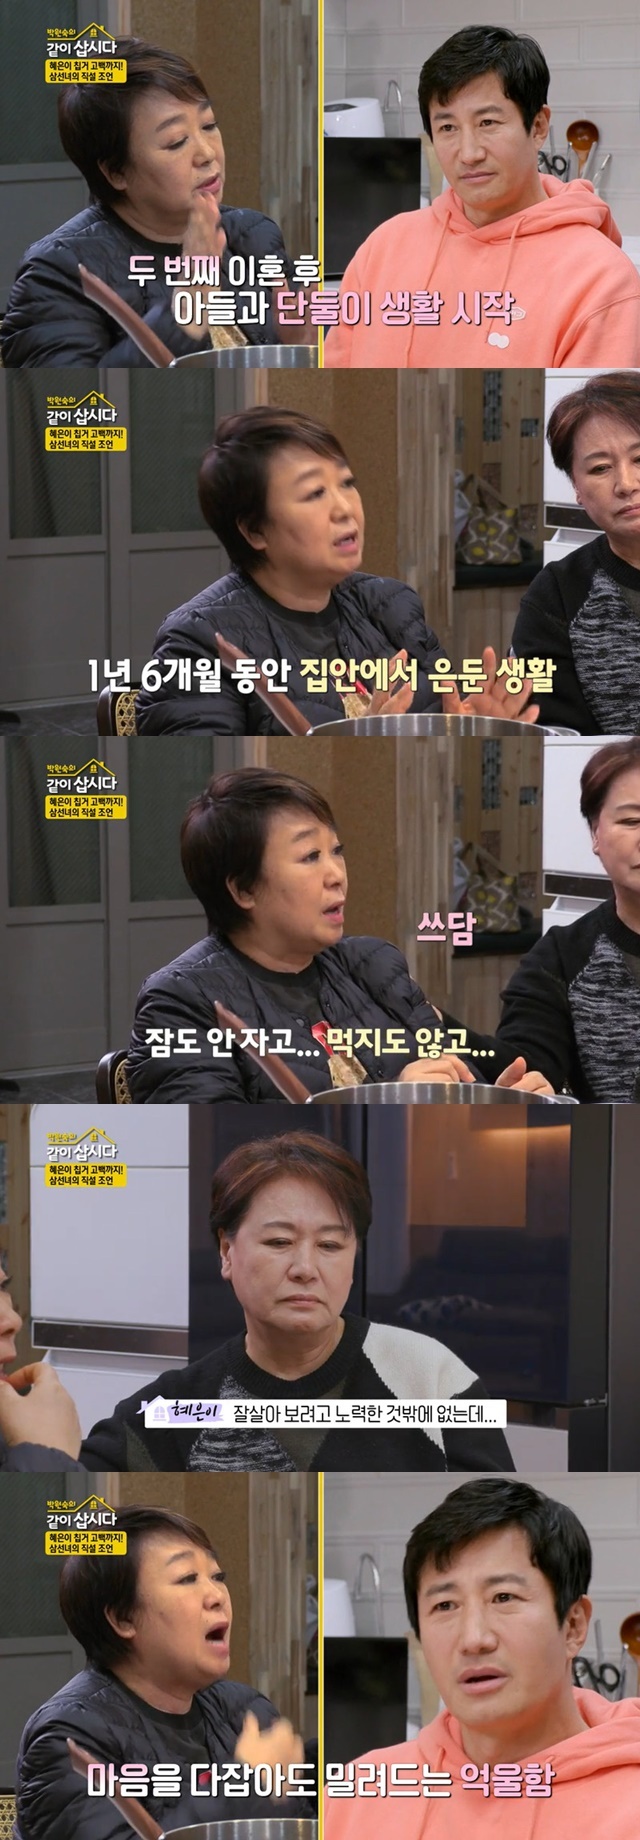 Hye Eun Yi candidly confessed her feelings after her second divorce.On April 26, KBS 2TV Park Won-sooks Lets Live together Season 3, Hye Eun Yi told Lee Hoons troubles.Lee Hoon said, When you live, you suffer unfair things.I did not do it, but I had a lot of things, but how did you get through it? Hye Eun Yi said, At first I endured because of the children and at some point I think it is my fault.I just did it without knowing what I was going to do and what I was ready for and what I was doing well, he said.Park Won-sook said Hye Eun Yis character is a dull thing, adding, There is no seller. Character makes a seller.I was so patient, but I could not do some people. Hye Eun Yi joked twice, referring to divorce, saying, I could not do a job. But Hye Eun Yi said, I am now sitting out alone and out of the house for a year and a half without moving in the house.Not sleep, not eat. Not to mention self-esteem. Too much trouble. What the hell am I doing at this age? Not once, not twice.Ive tried to make a good living, and its so unfair.I was out of my mind, but I was just so unhappy and swollen, and I had to fill that self-esteem. You cant do this.I am me, he said. So I came to live with you. At first it was too hard.I was really hard because my personality itself did not fit, but I really wrapped it up. I thanked Park Won-sook, Kim Young-ran and Kim Chung for helping me.